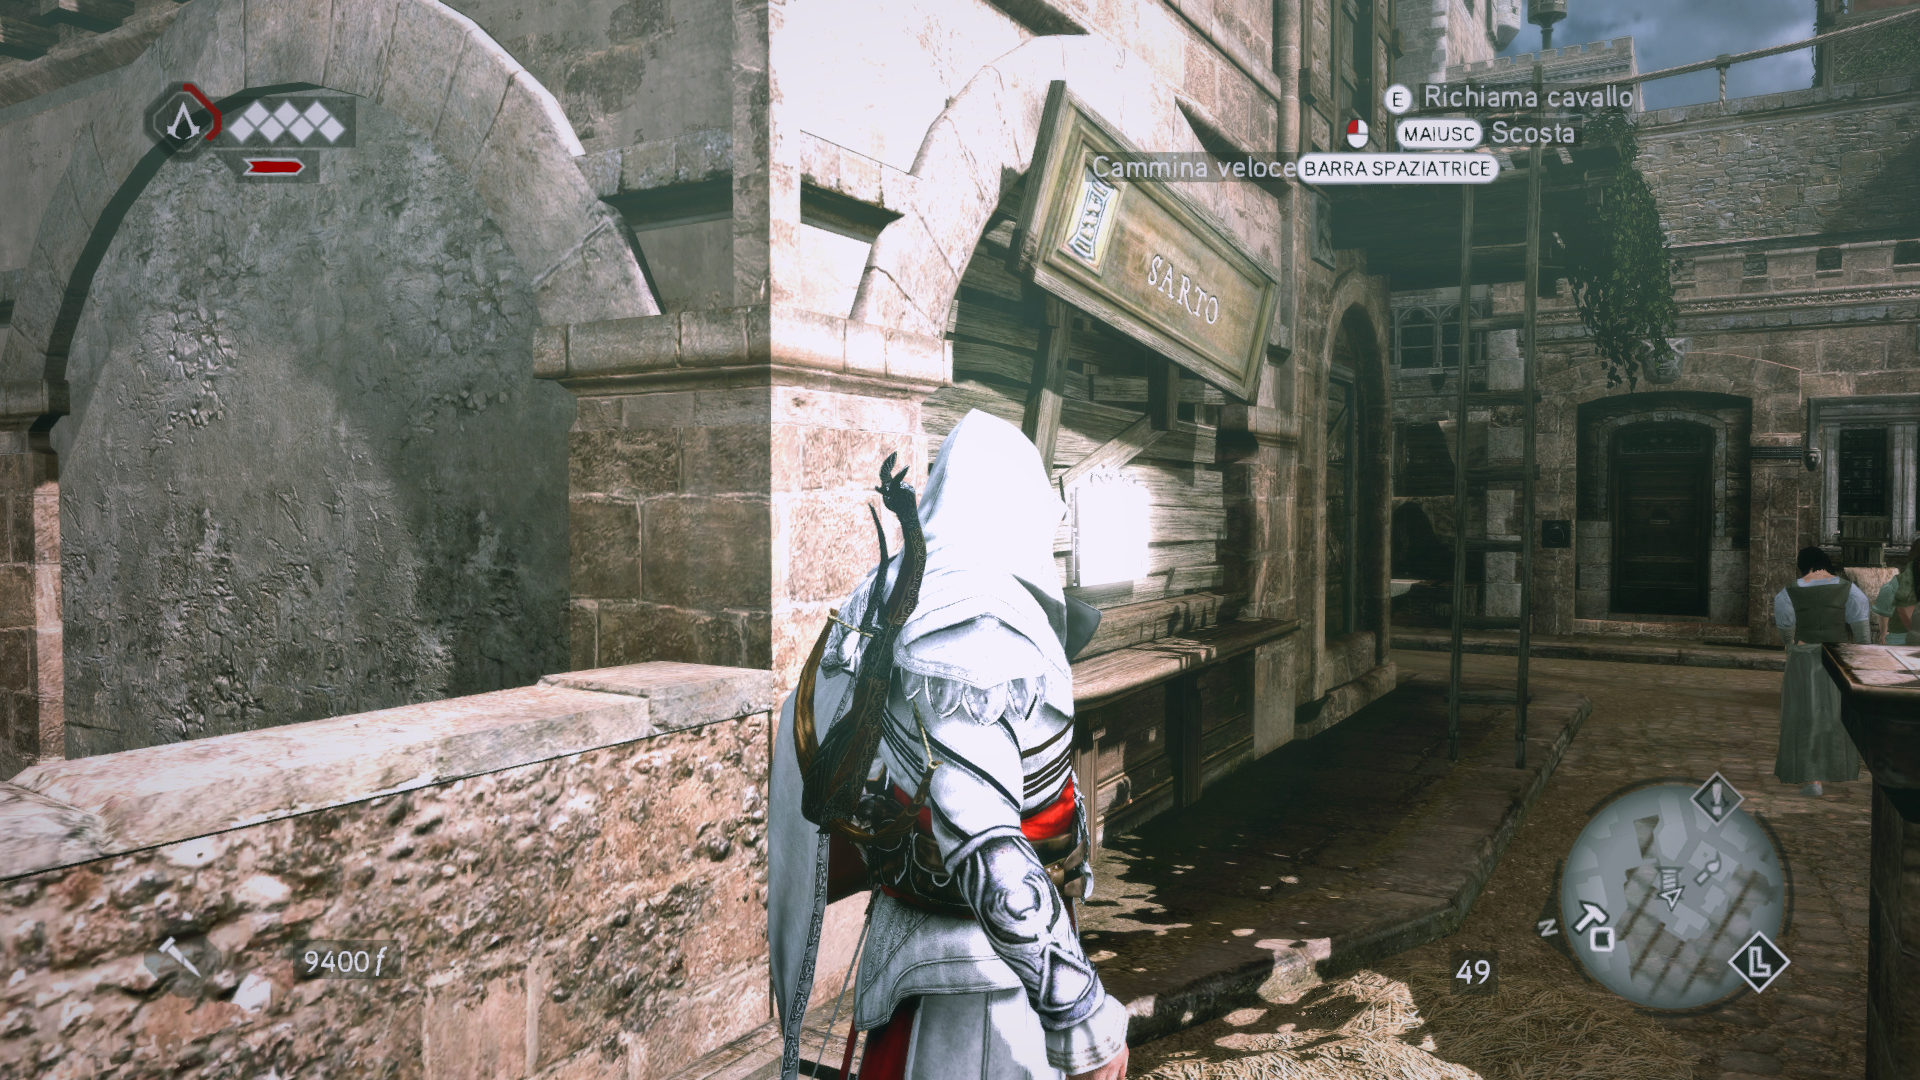 Ezio Classic vambrace and removed spaulders mod for Assassin's Creed:  Brotherhood - ModDB